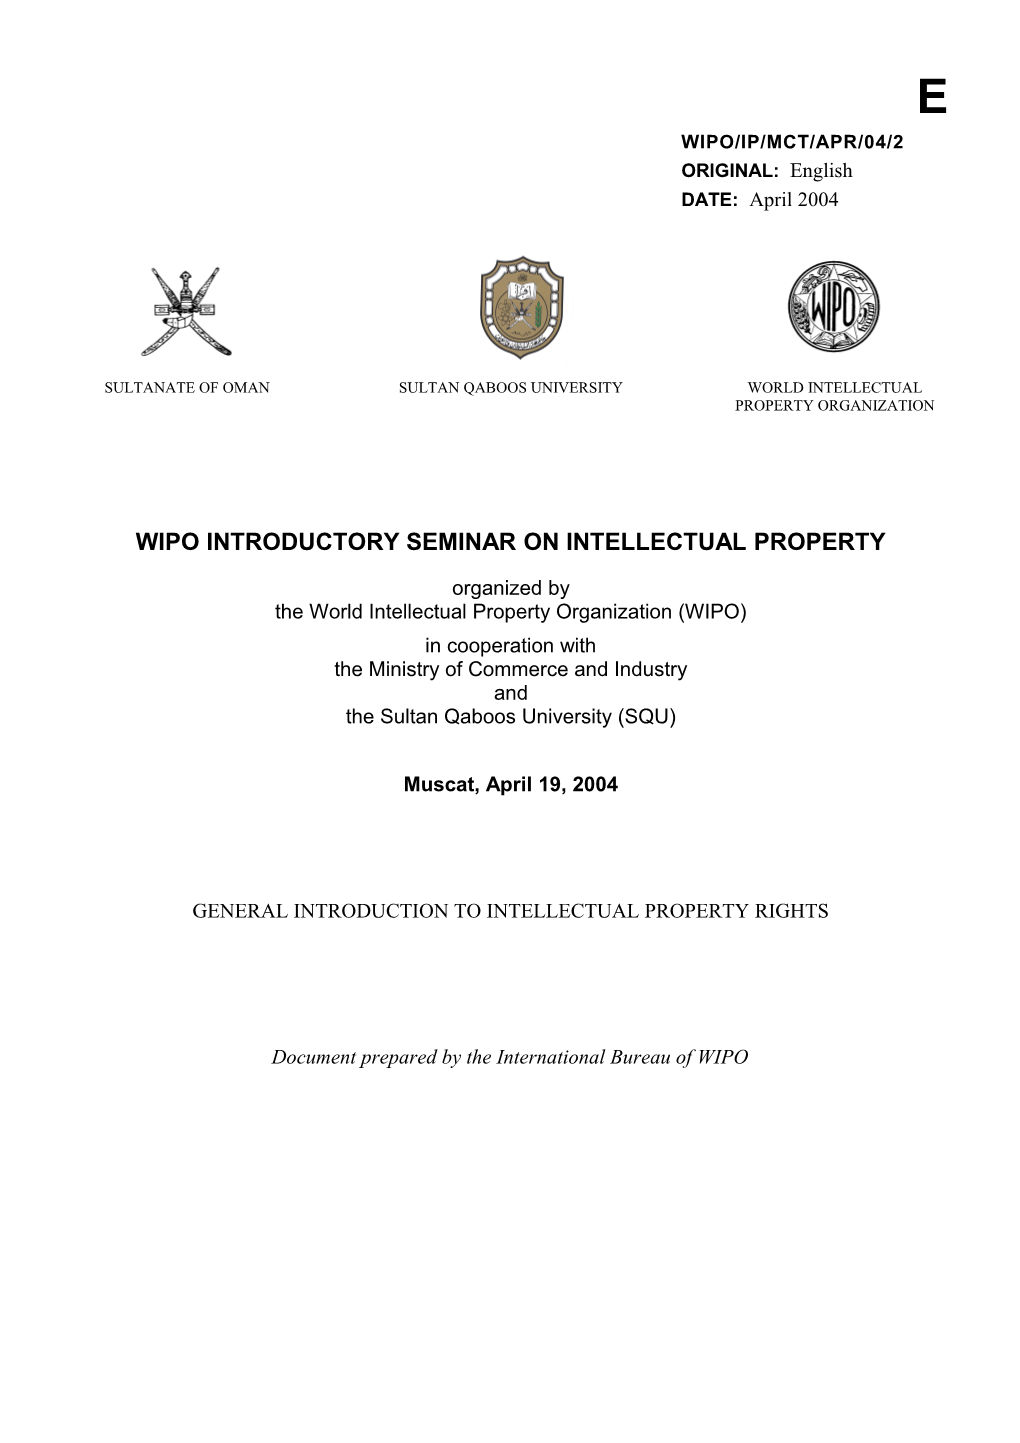 WIPO/IP/MCT/APR/04/2: General Introduction to Intellectual Property Rights